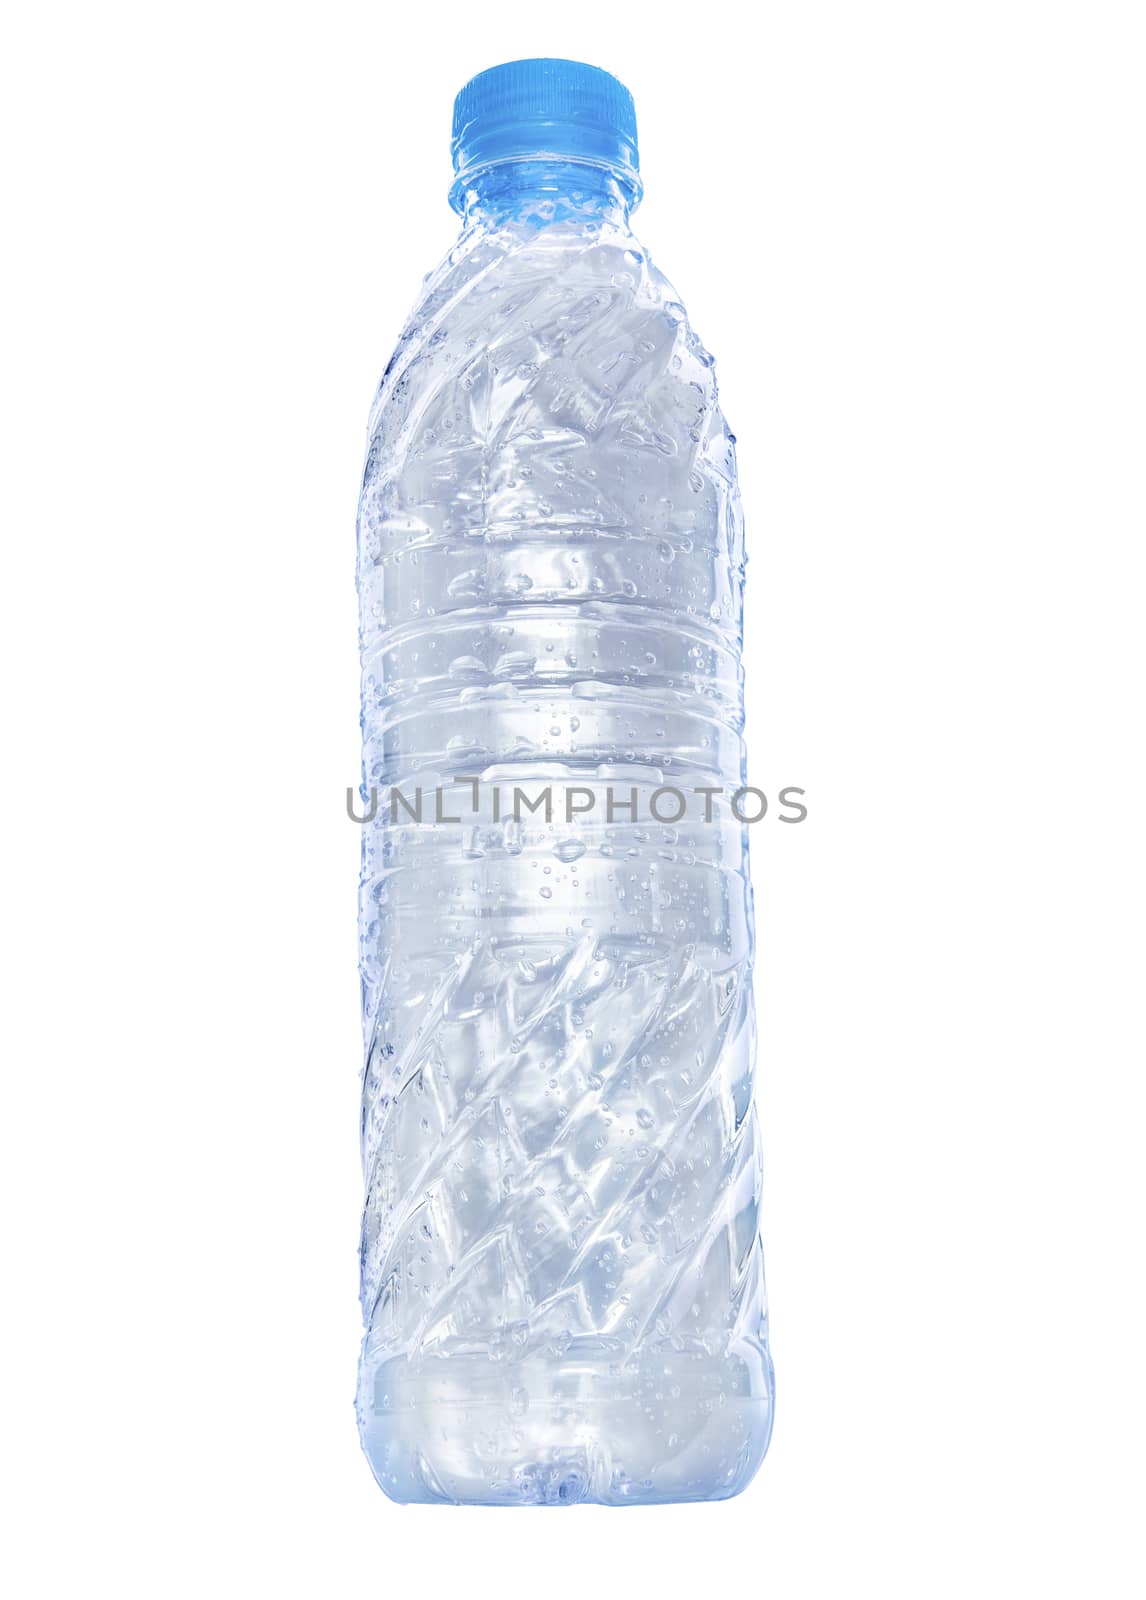 clean and freshness drinking water in transparent plastic bottle isolated on white background use for healthy life and care of food and beverage 